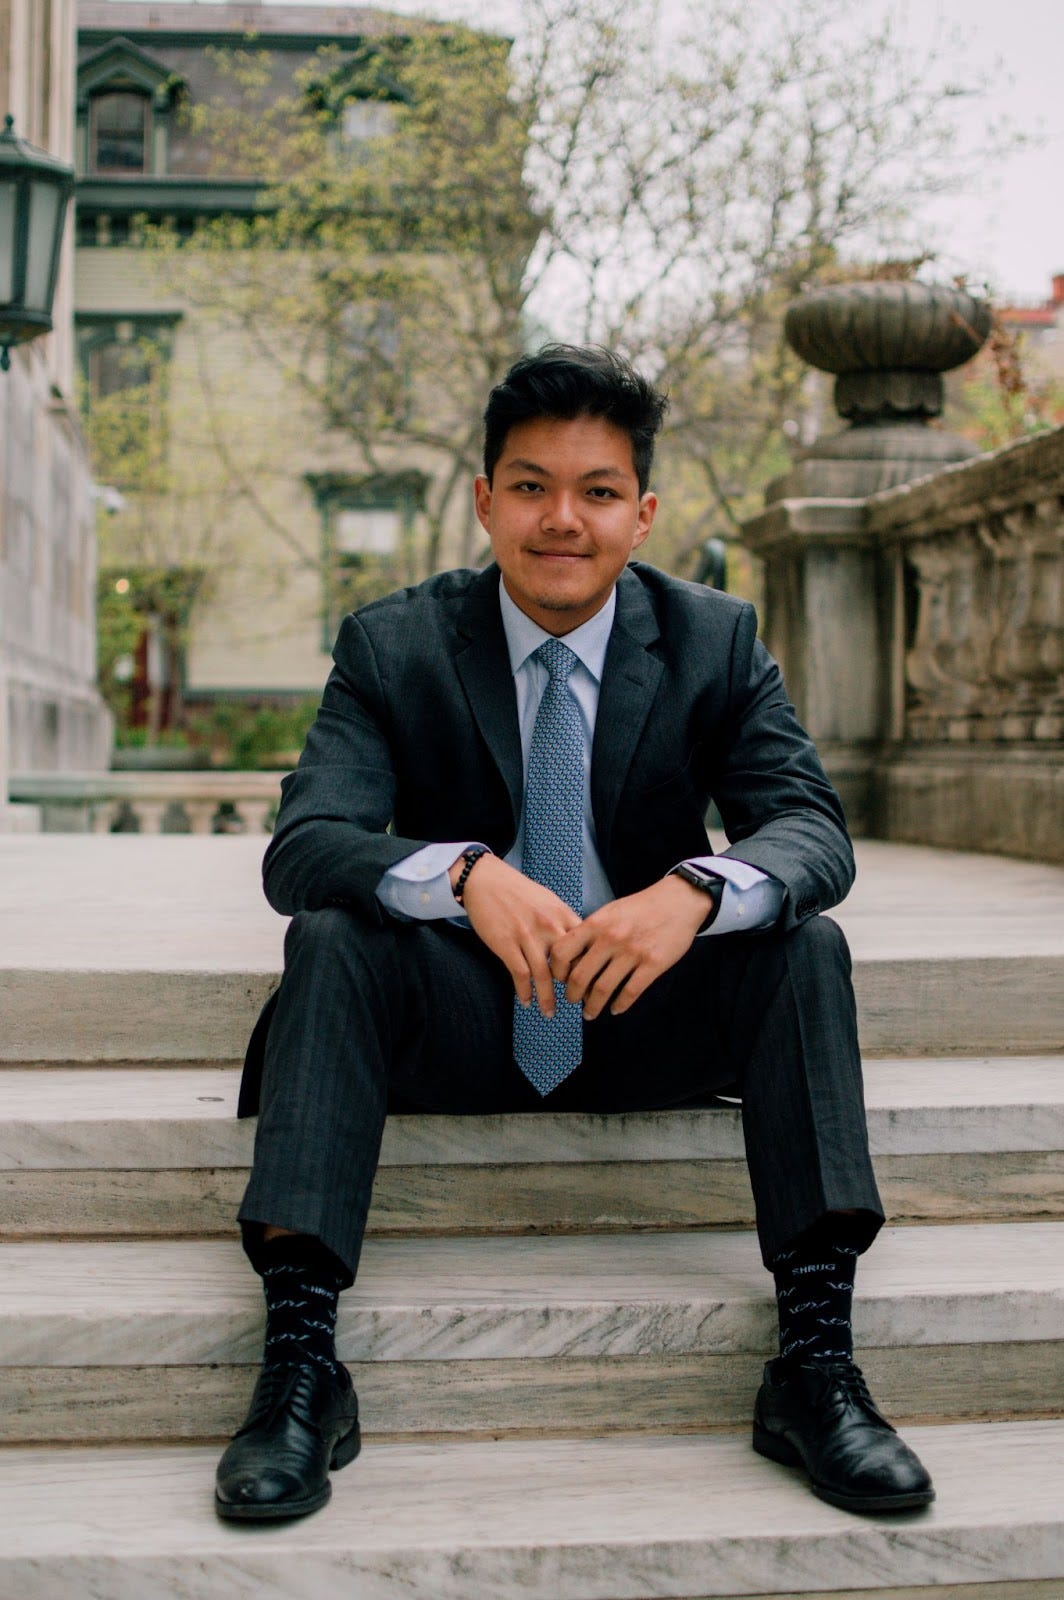 Ivan Zhao is pictured wearing a suit and tie, and sitting on some stone steps